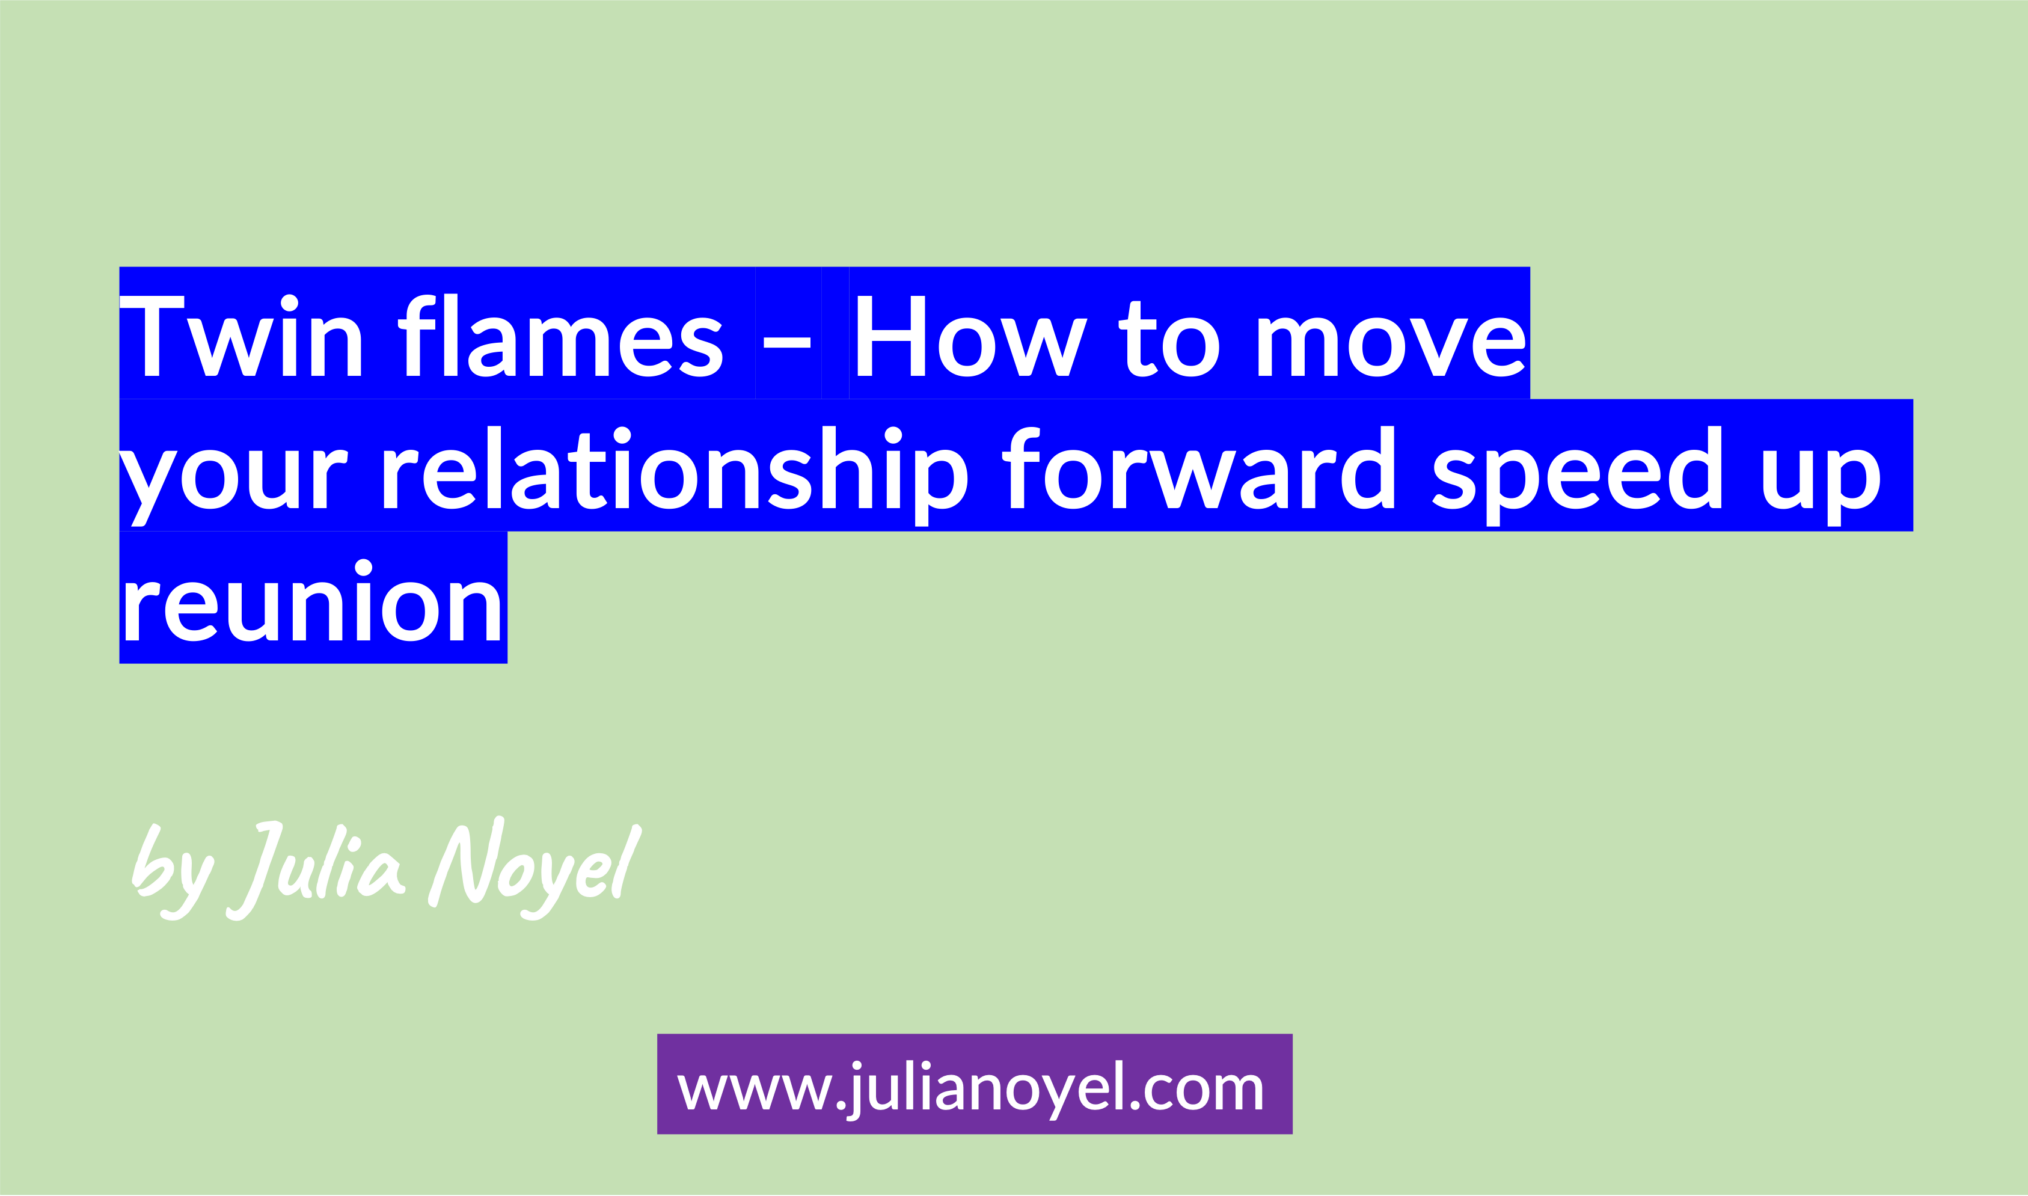 Twin flames – How to move your relationship forward speed up reunion